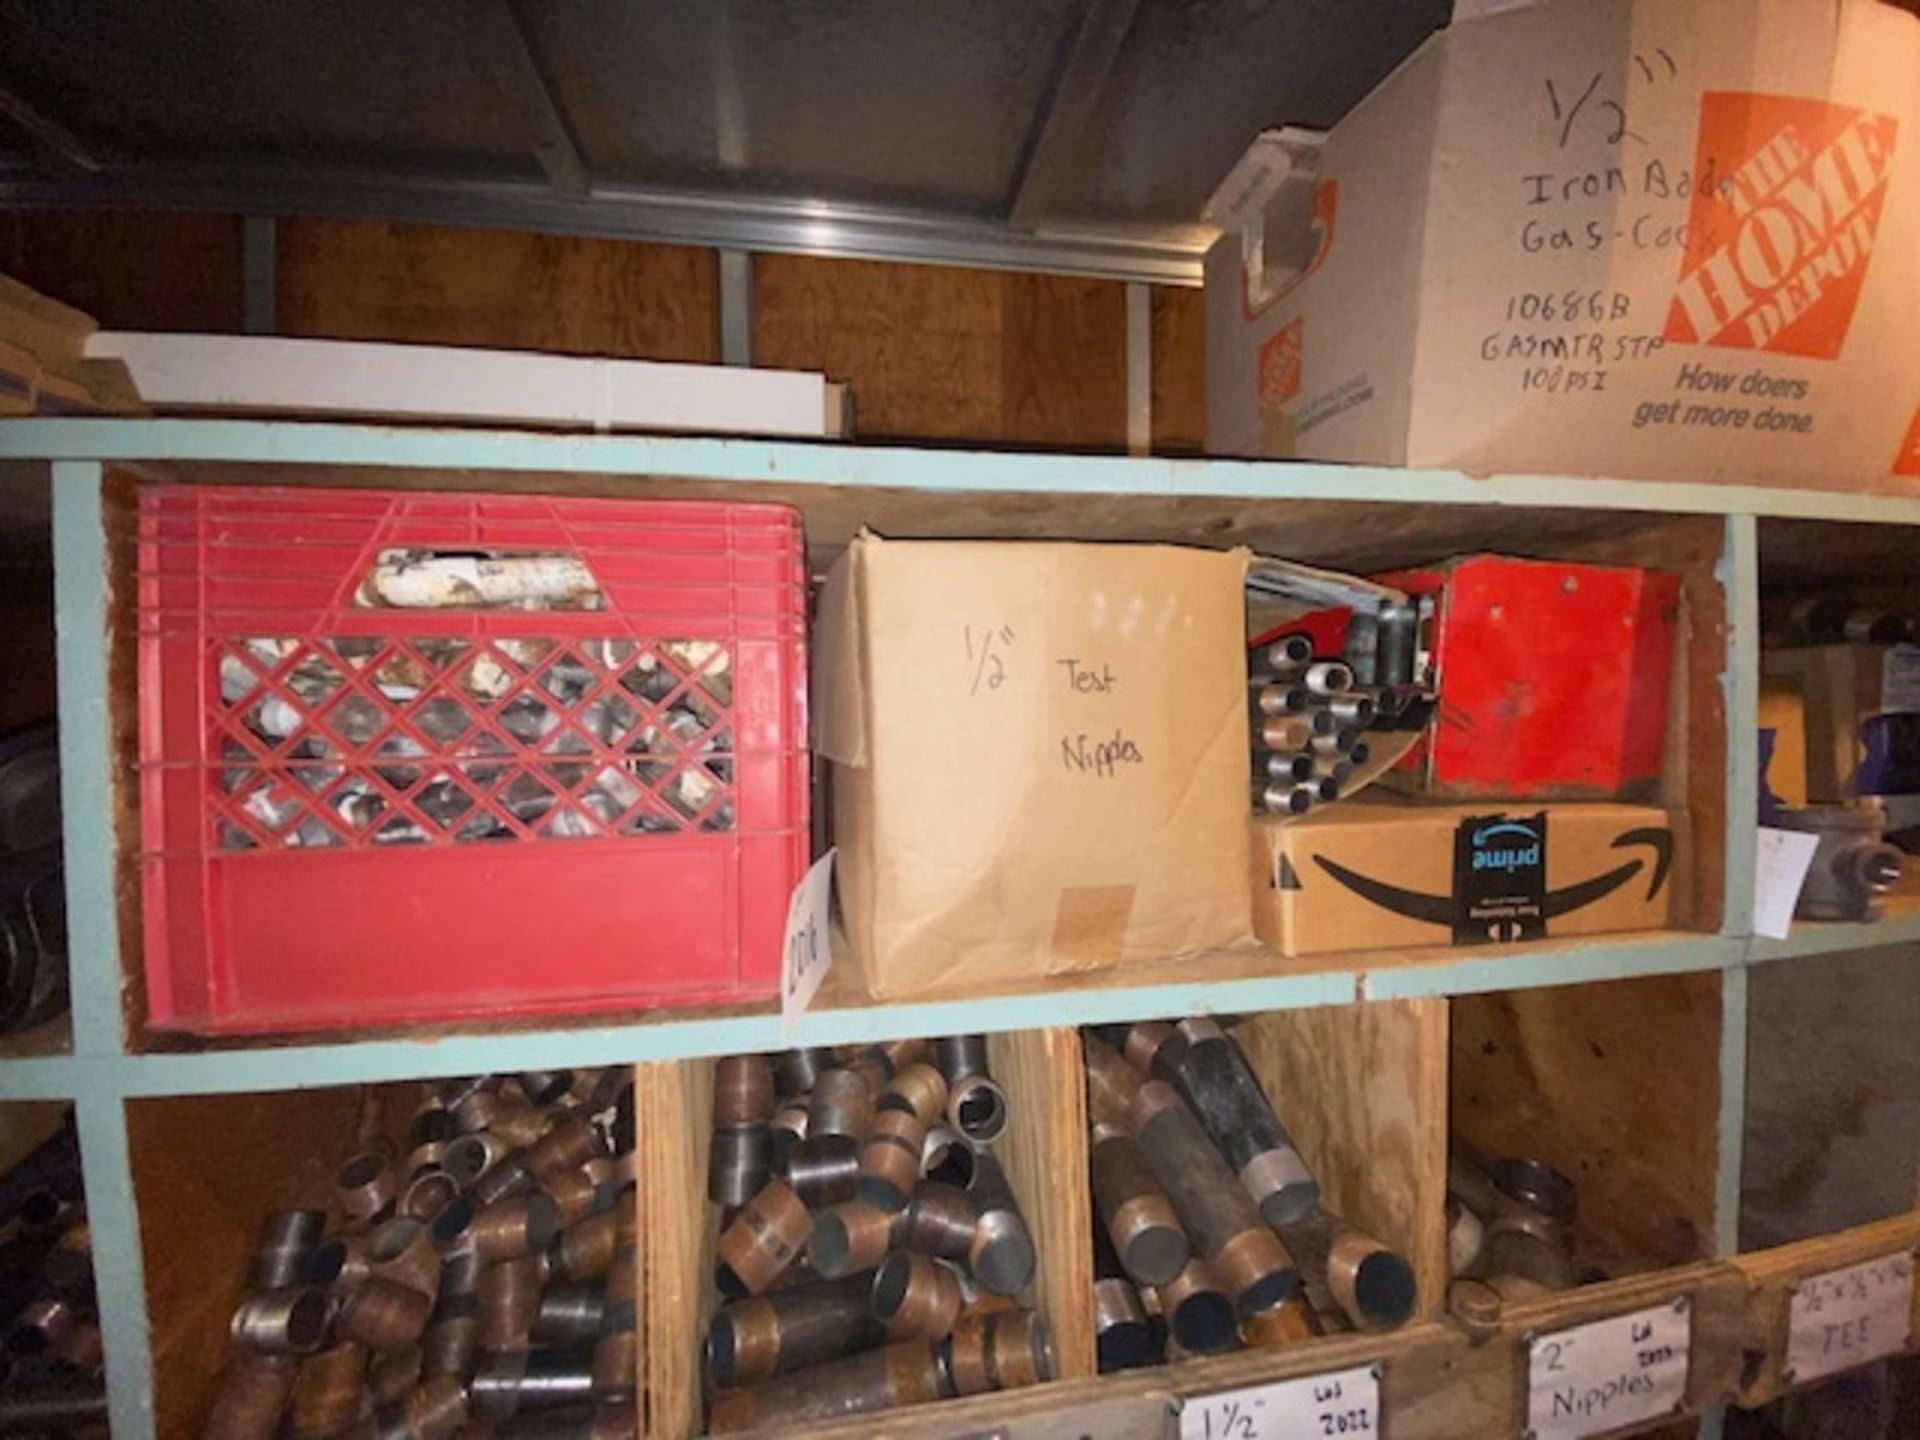 Contents of Shelf, Includes Assortment of Connections (LOCATED IN MONROEVILLE, PA) - Image 2 of 3